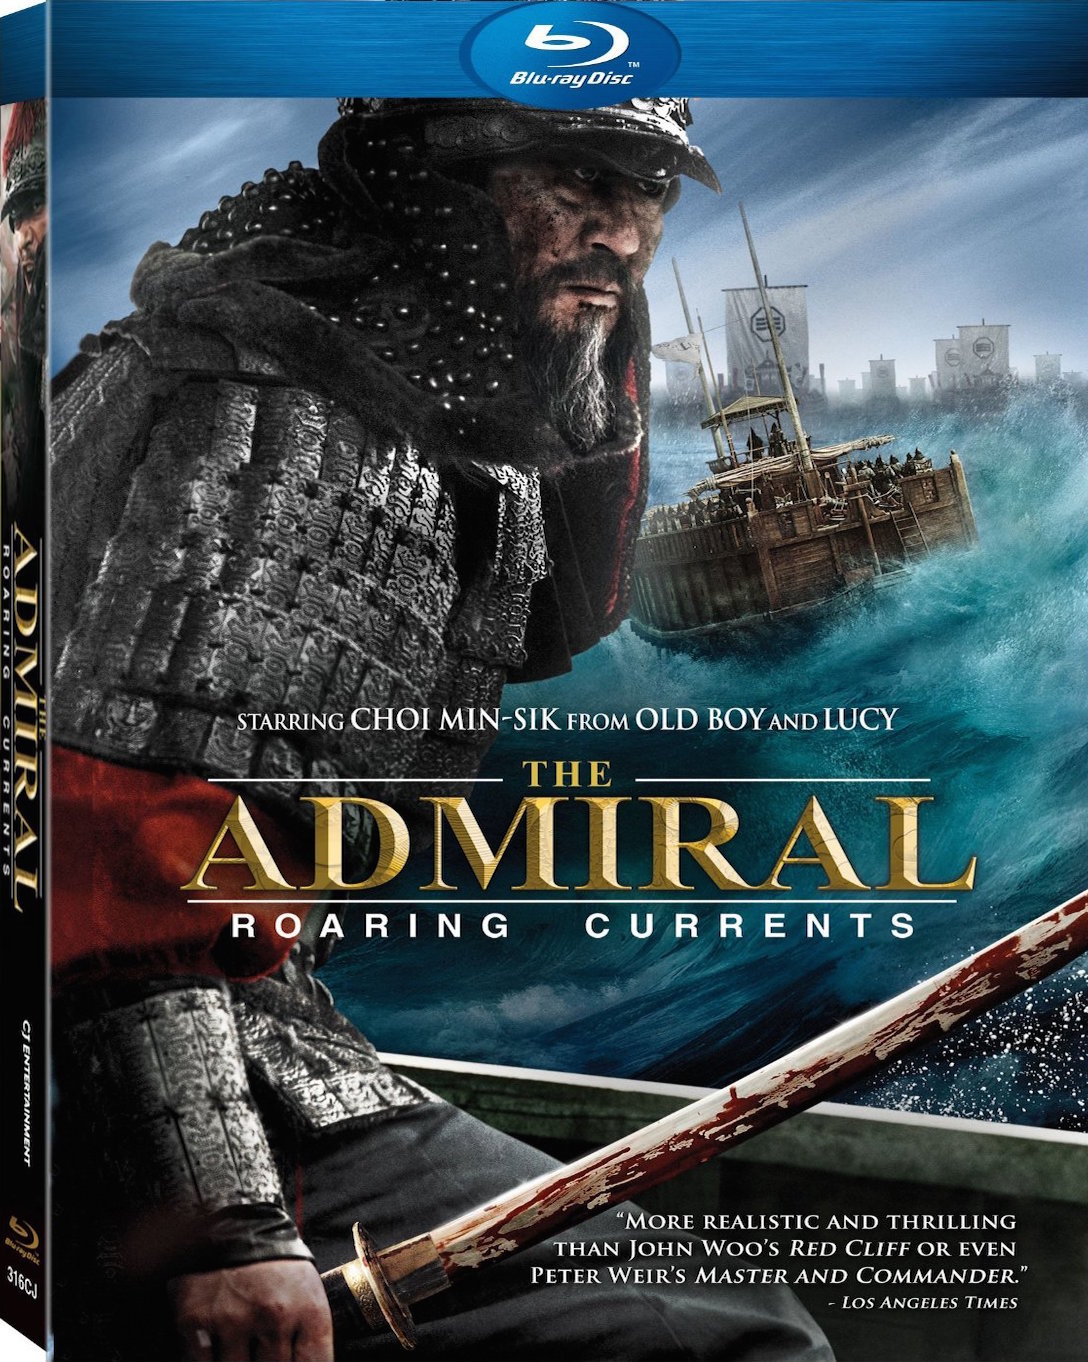 The Admiral: Roaring Currents HD wallpapers, Desktop wallpaper - most viewed